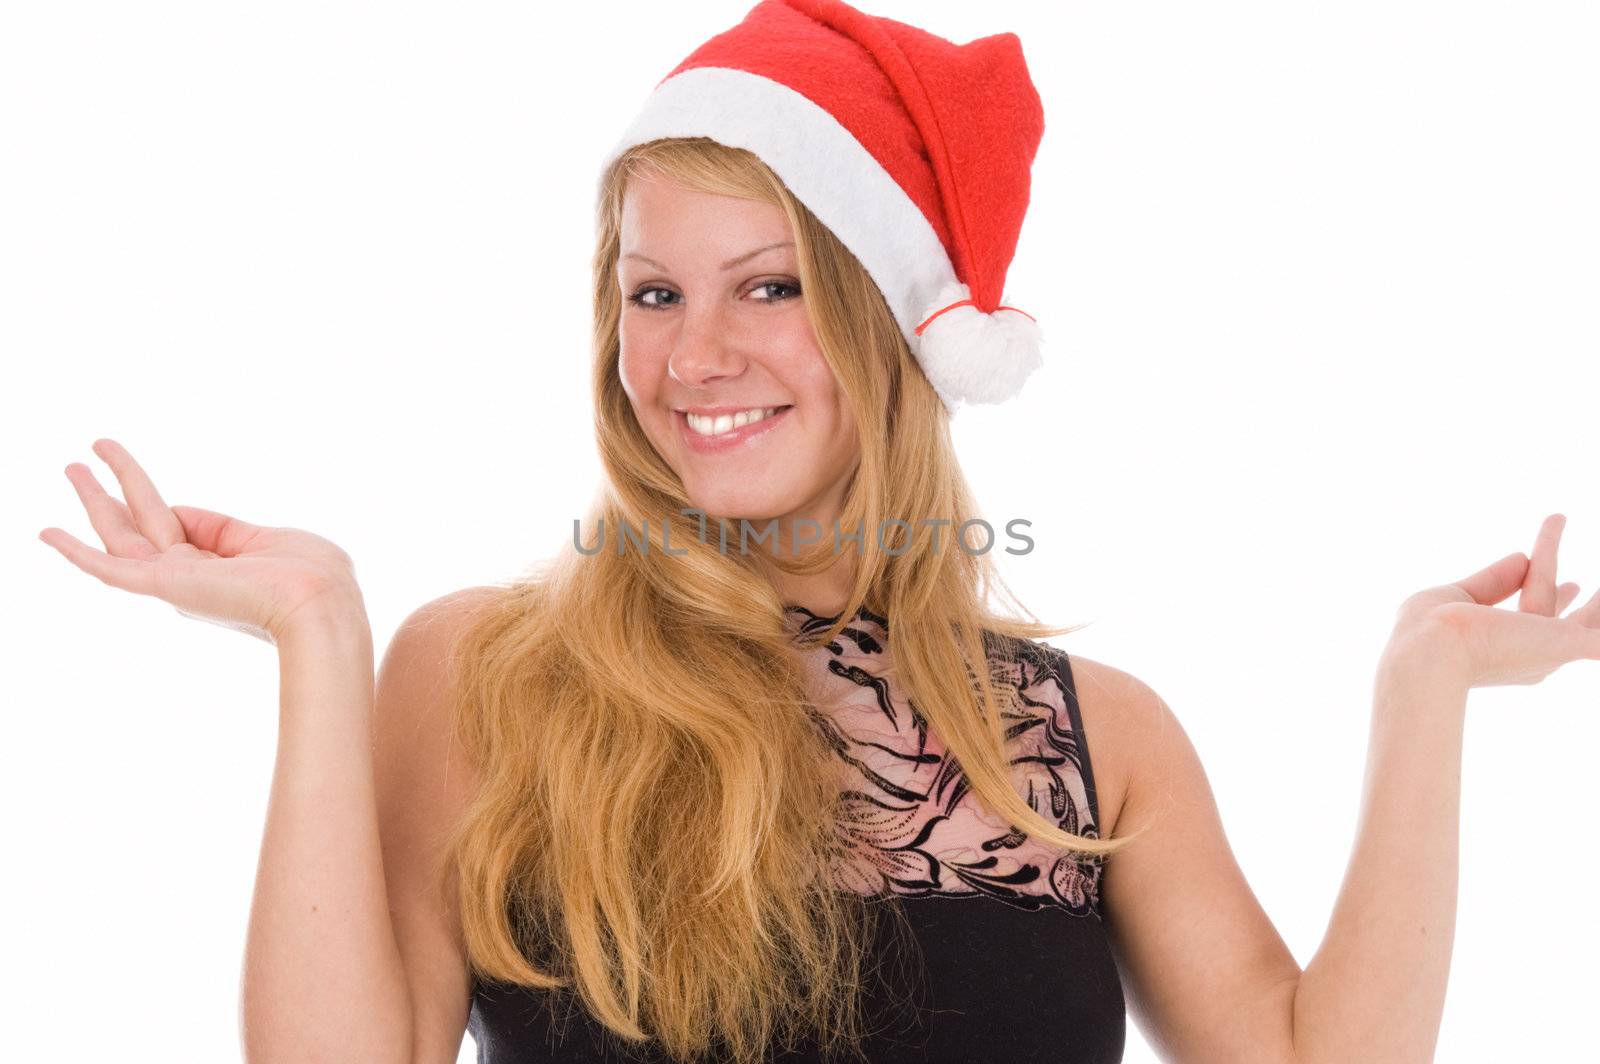 The young girl in the red hat, isolated on a white background